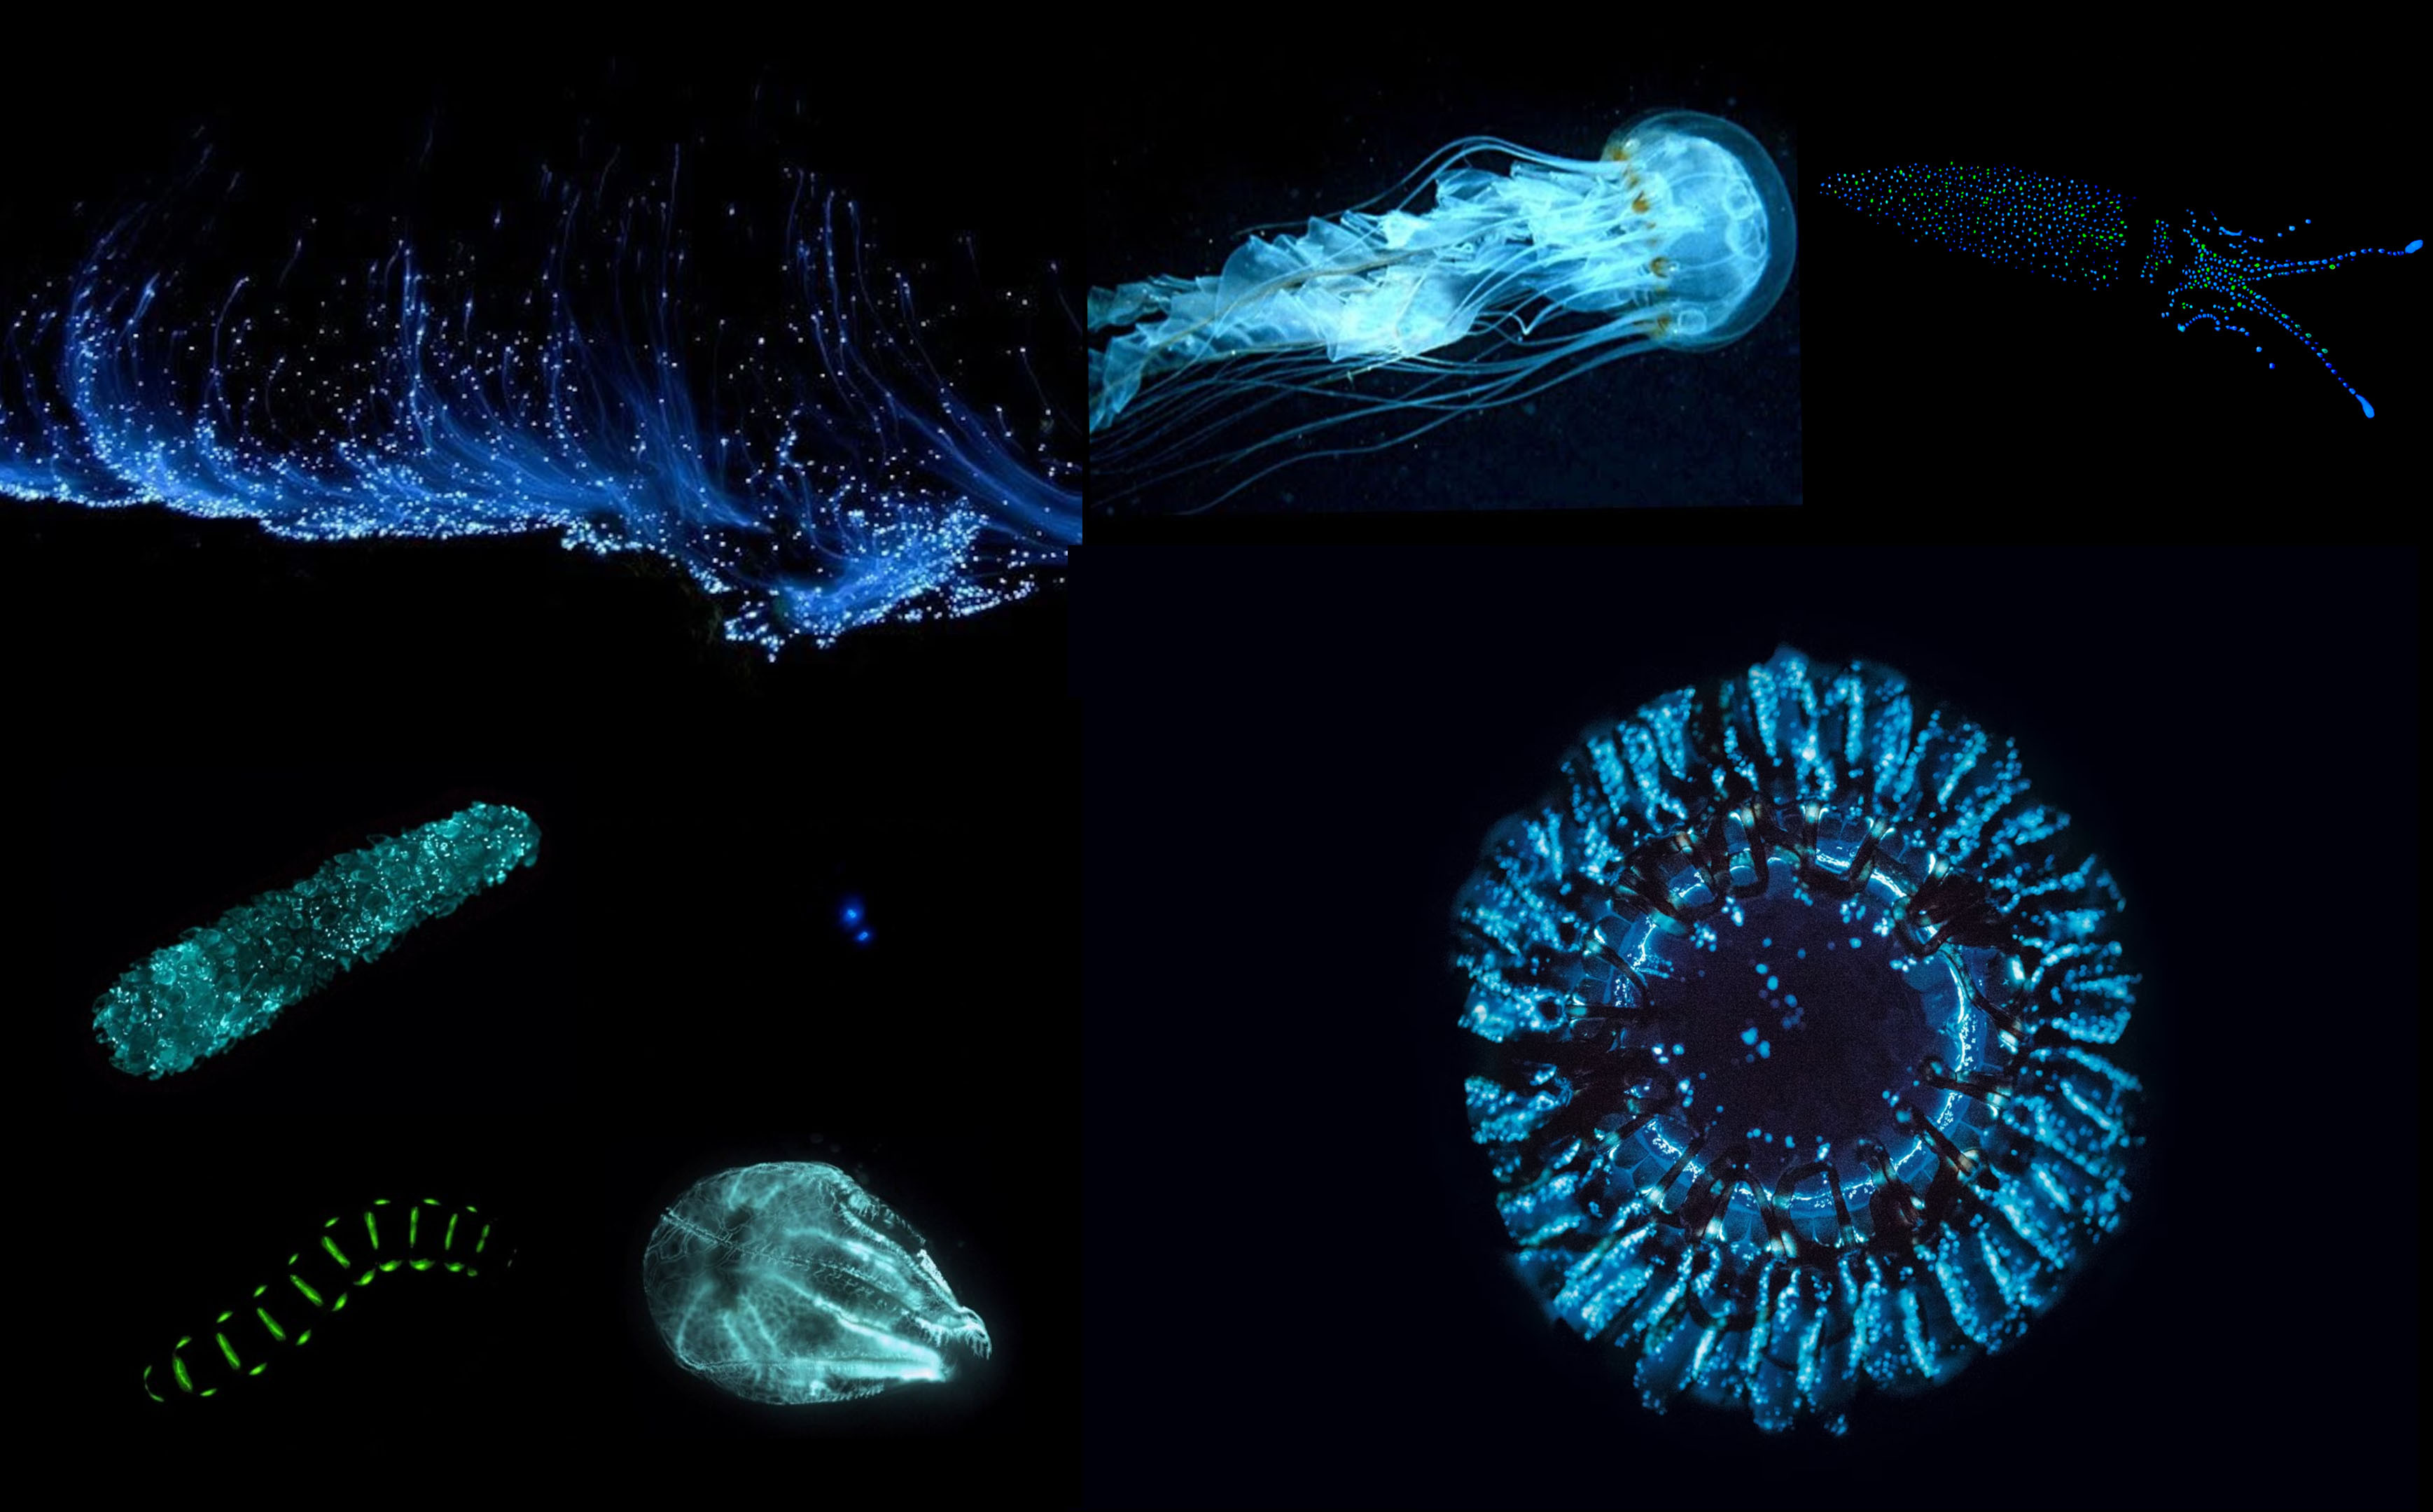 National Geographic references of the bioluminescence 